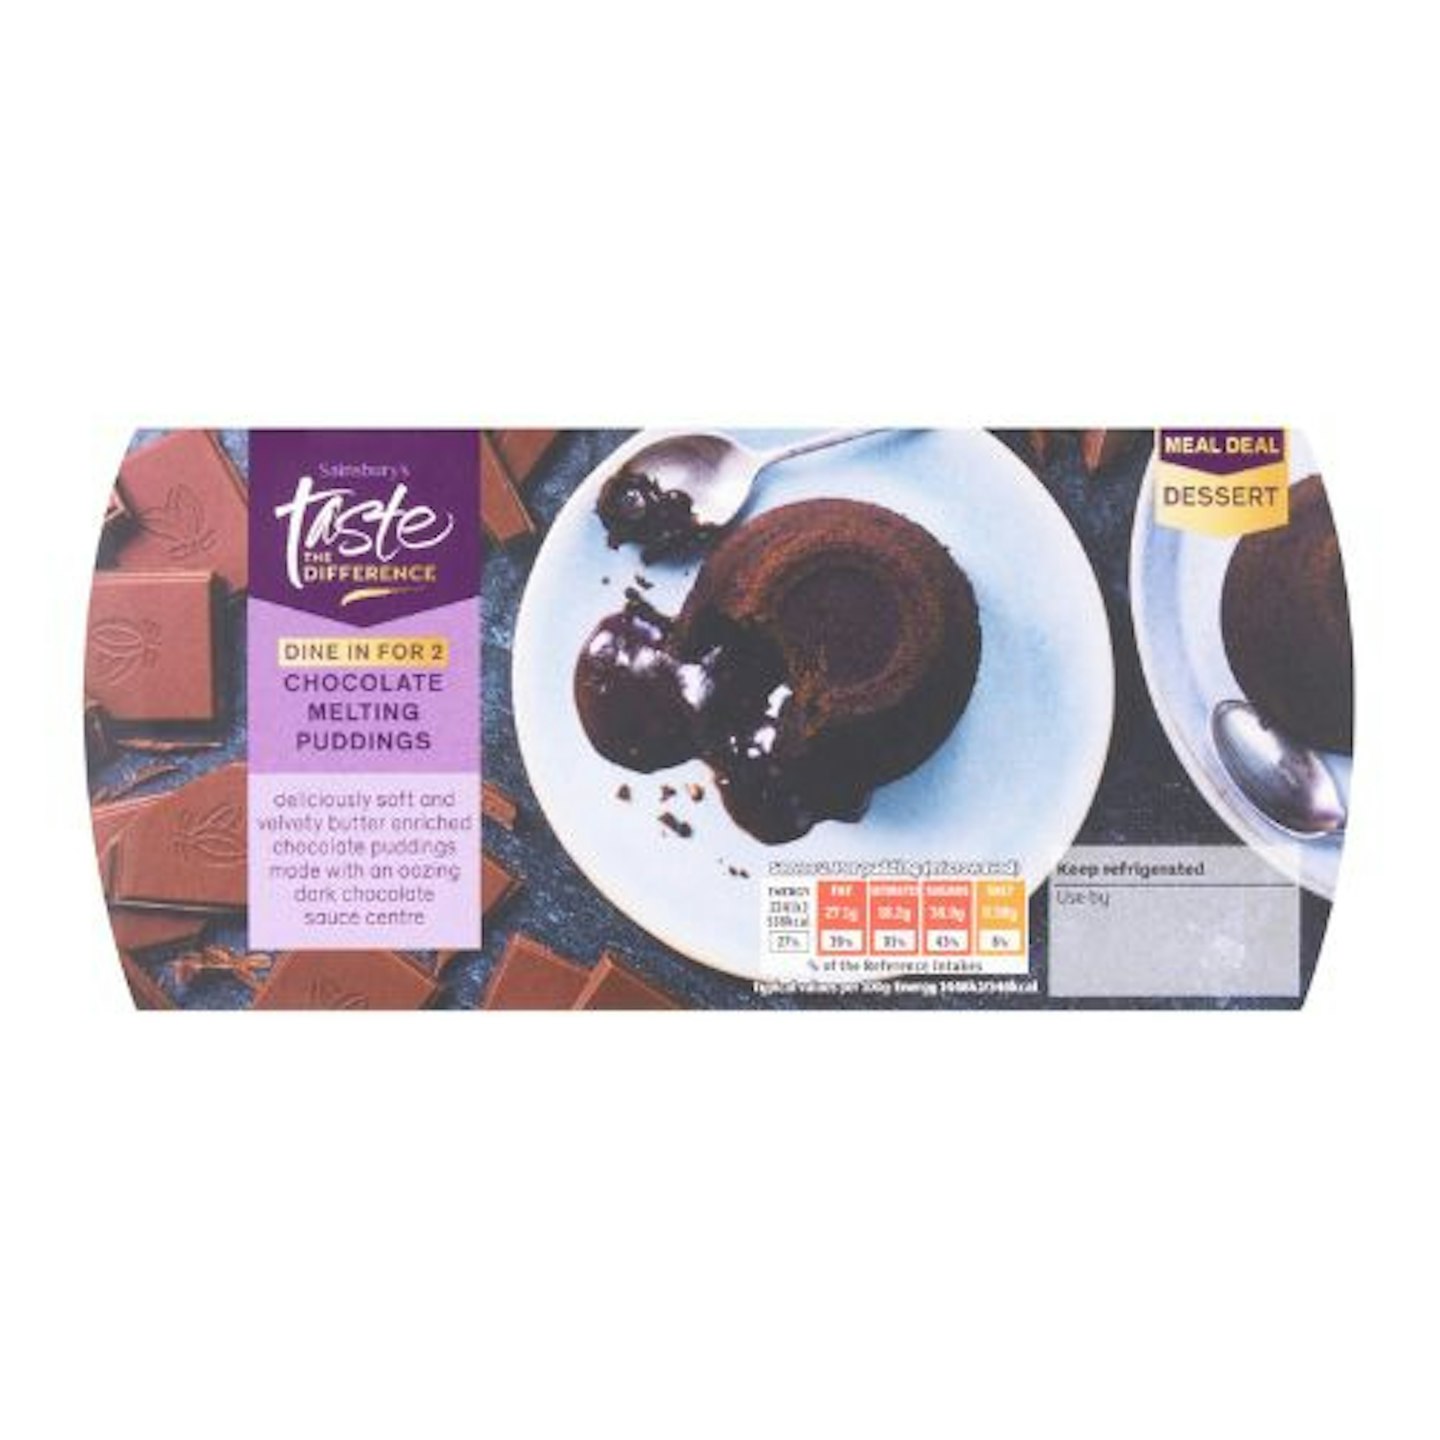 Sainsbury's Chocolate Melting Puddings, Taste the Difference 2x155g